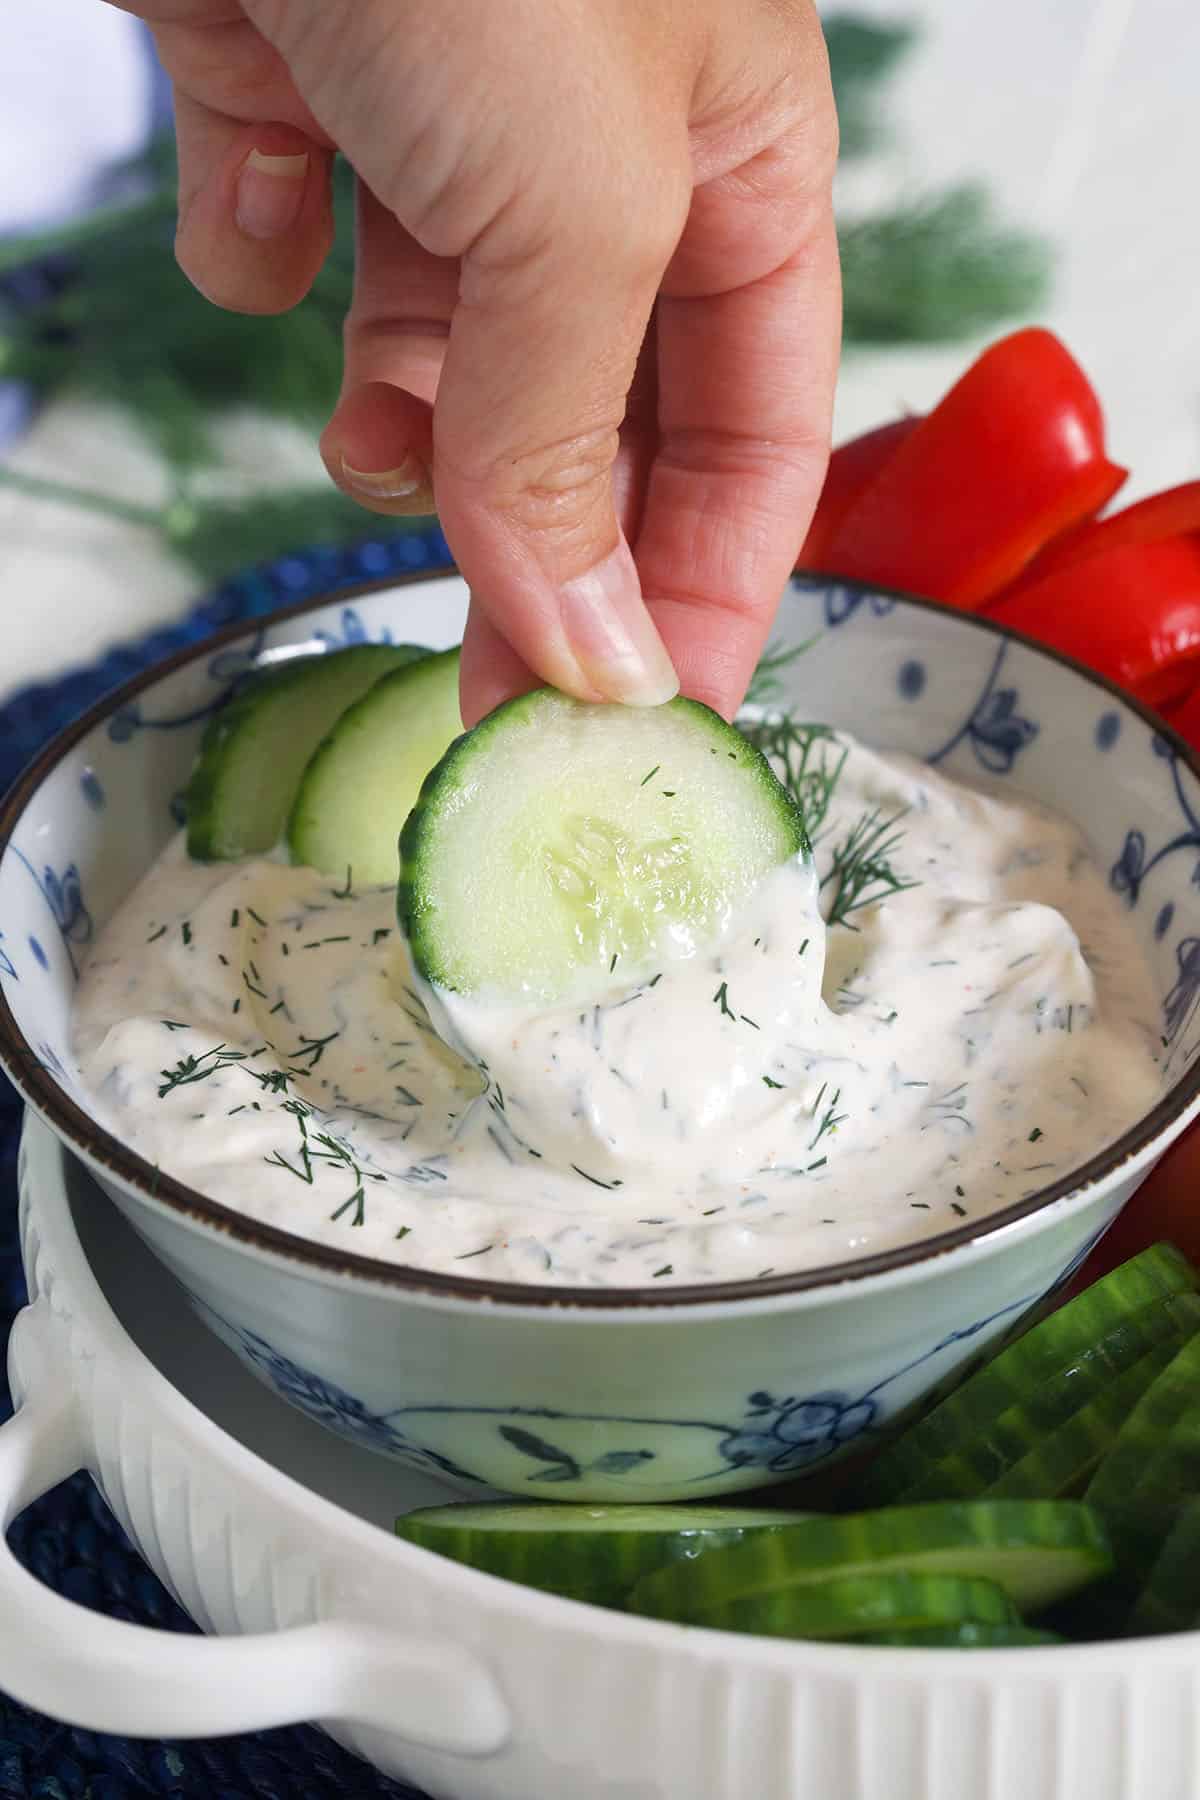 A hand is dipping cucumbers into the dill dip.